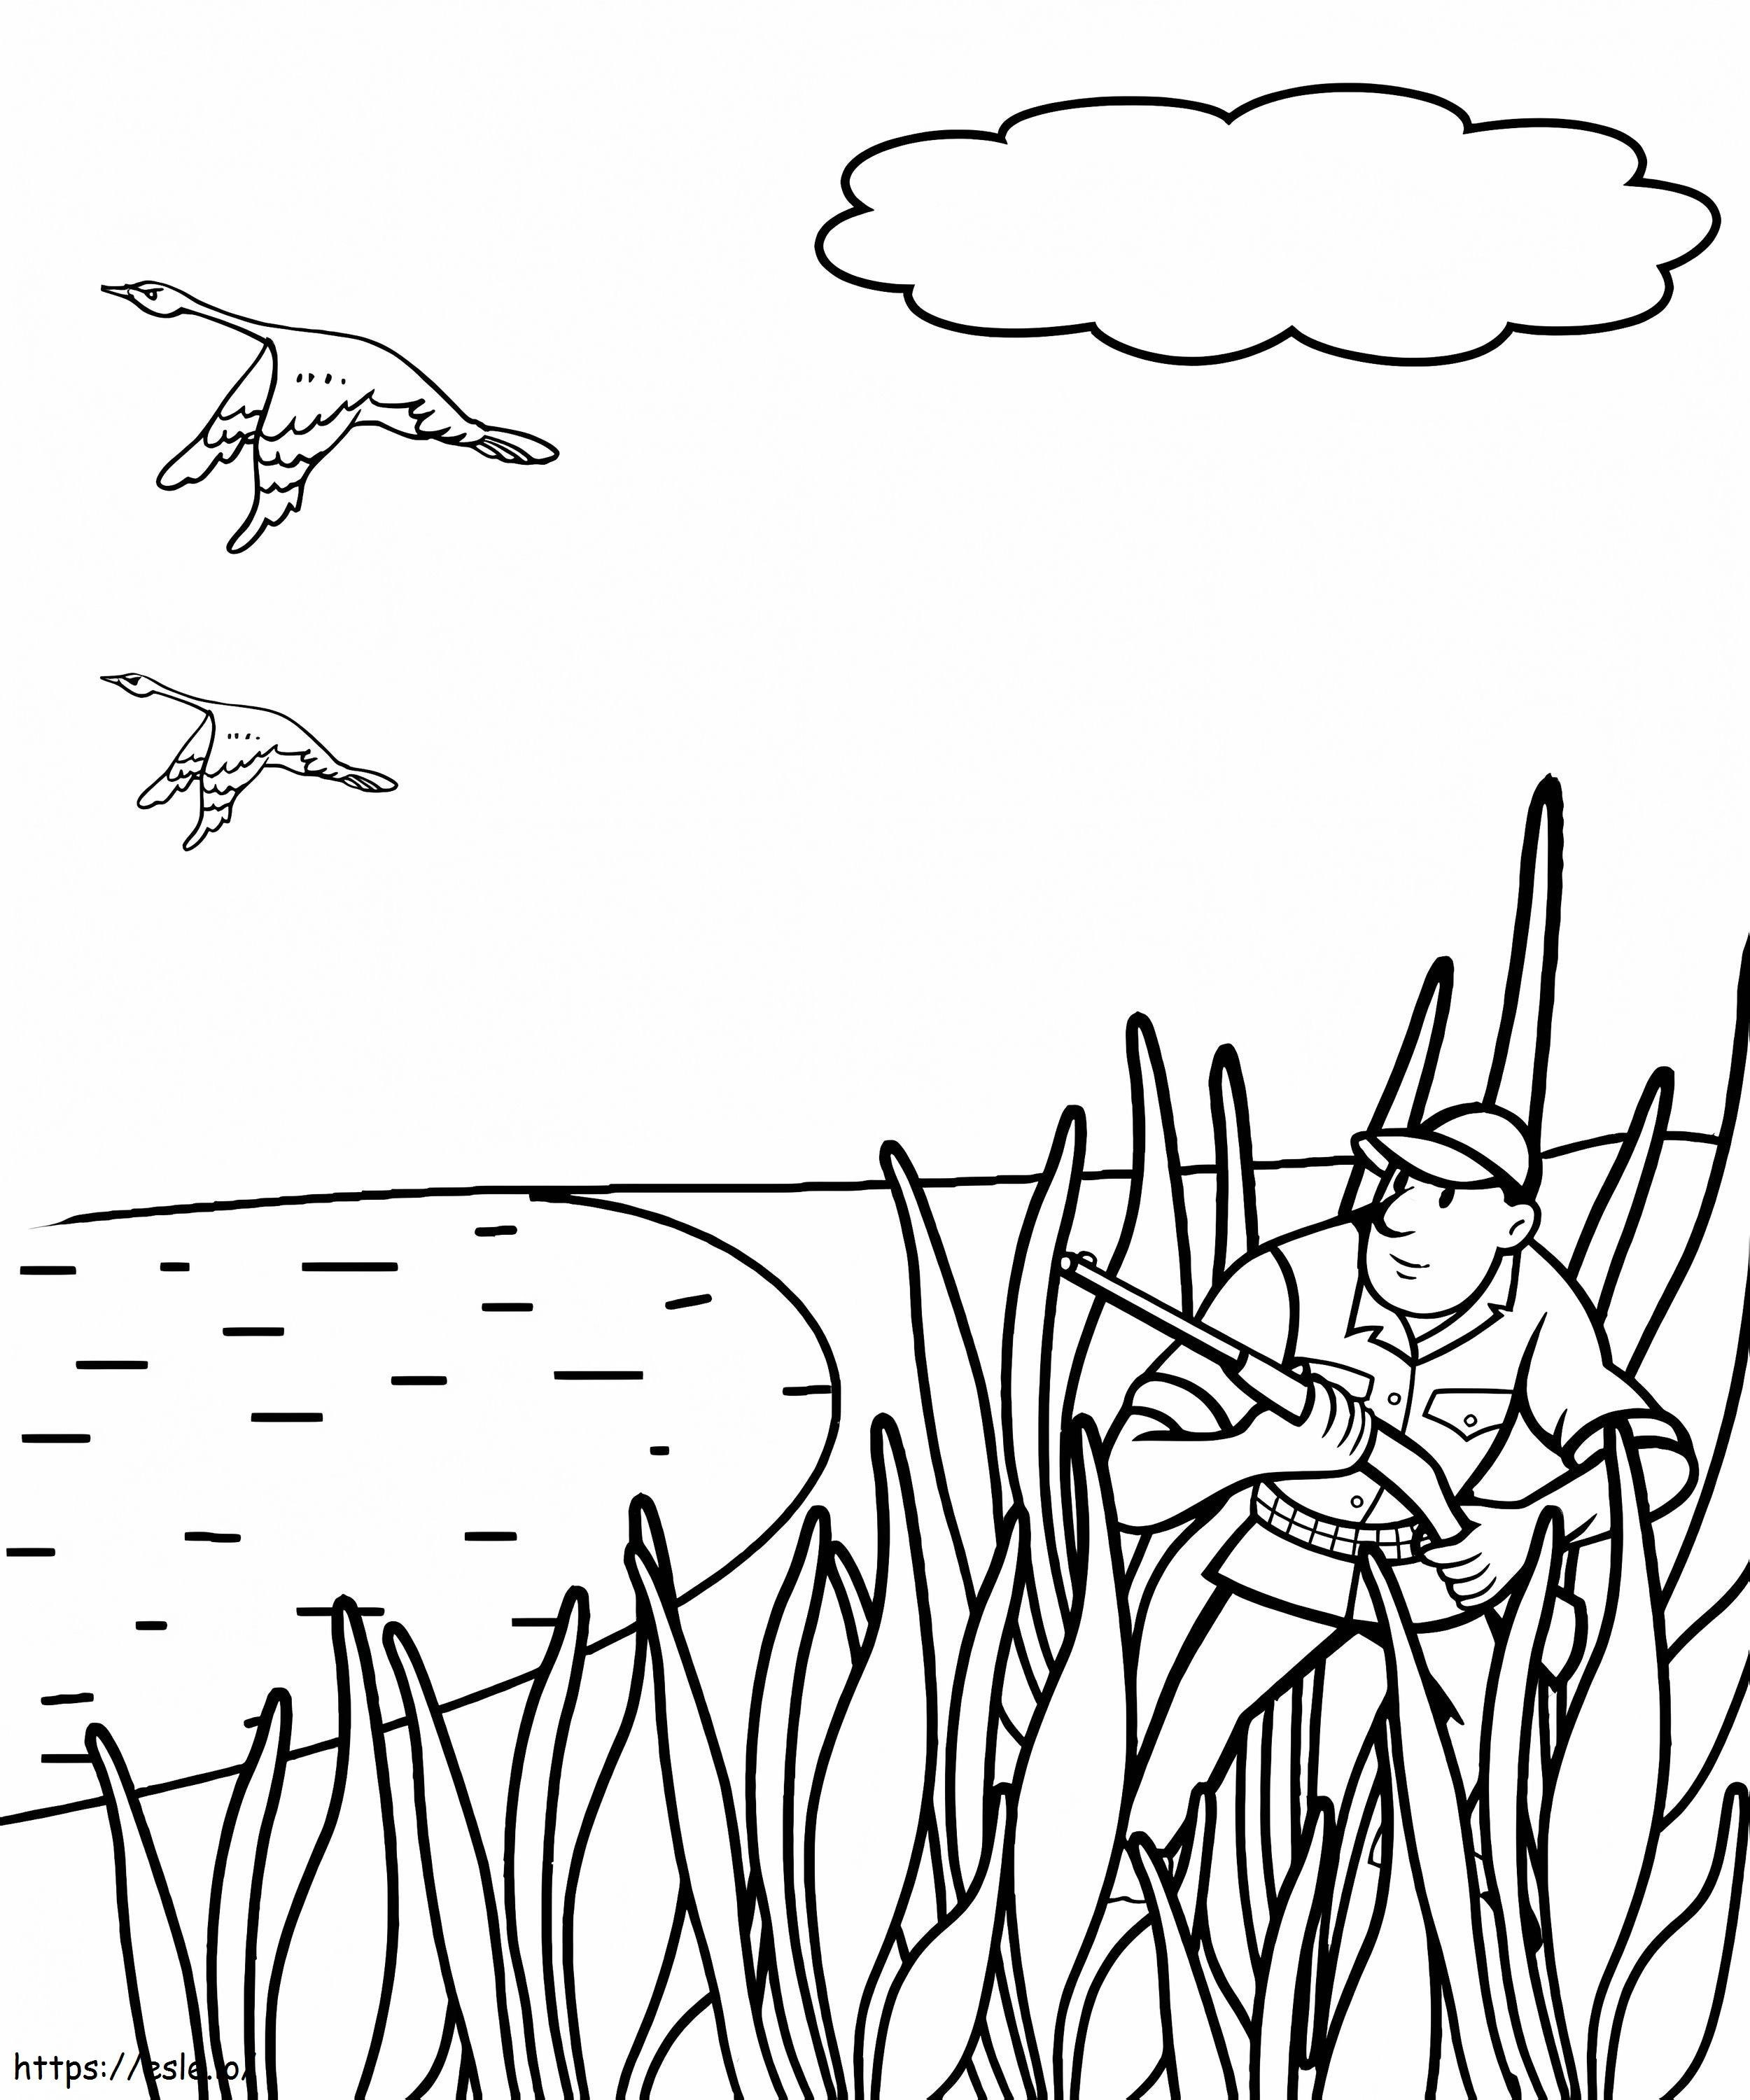 Stork Hunting coloring page